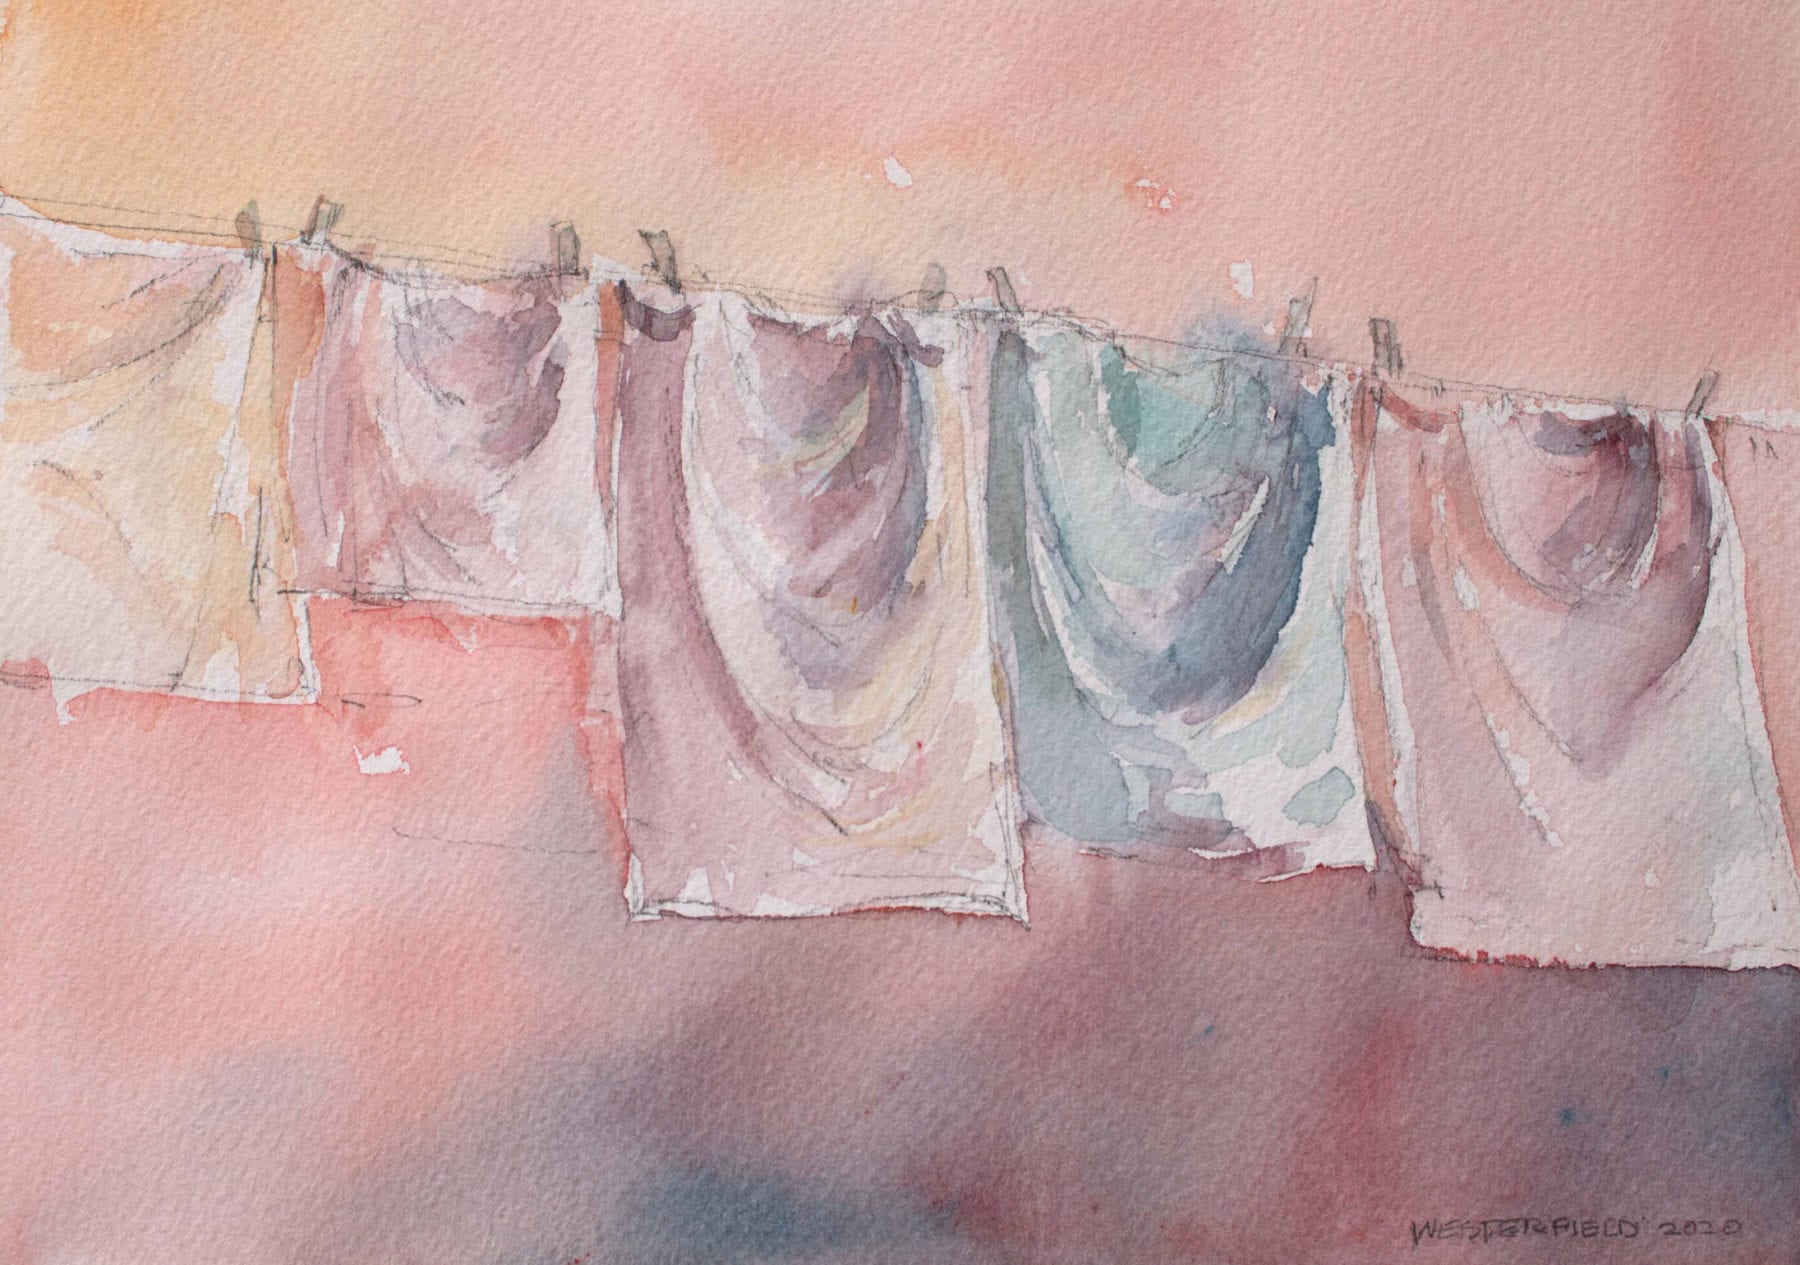 Lois Westerfield, On The Line, watercolor on Arches #140, 13 x 16